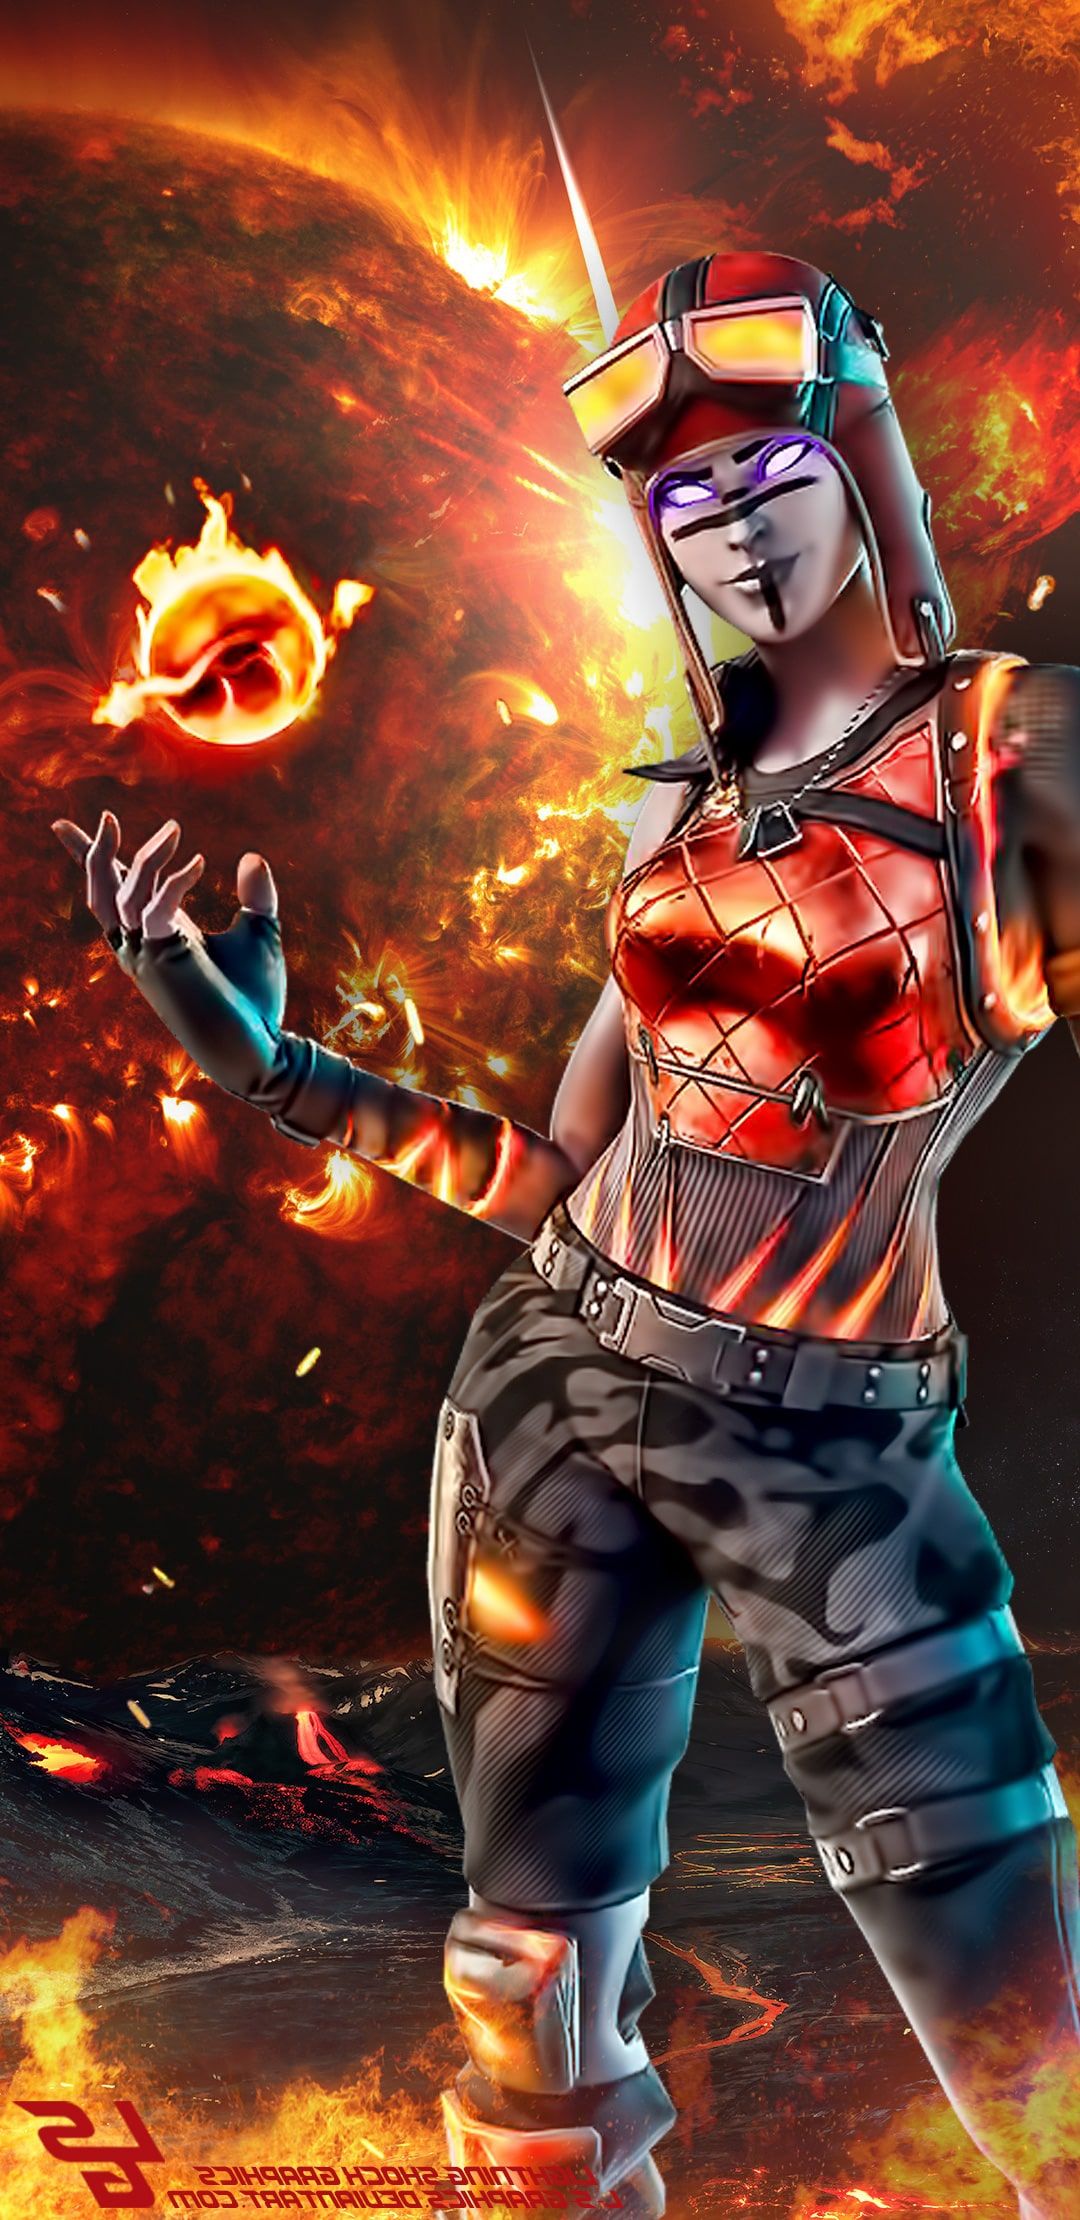 Renegade Raider wallpaper by SauceyyYT  Download on ZEDGE  4fc9